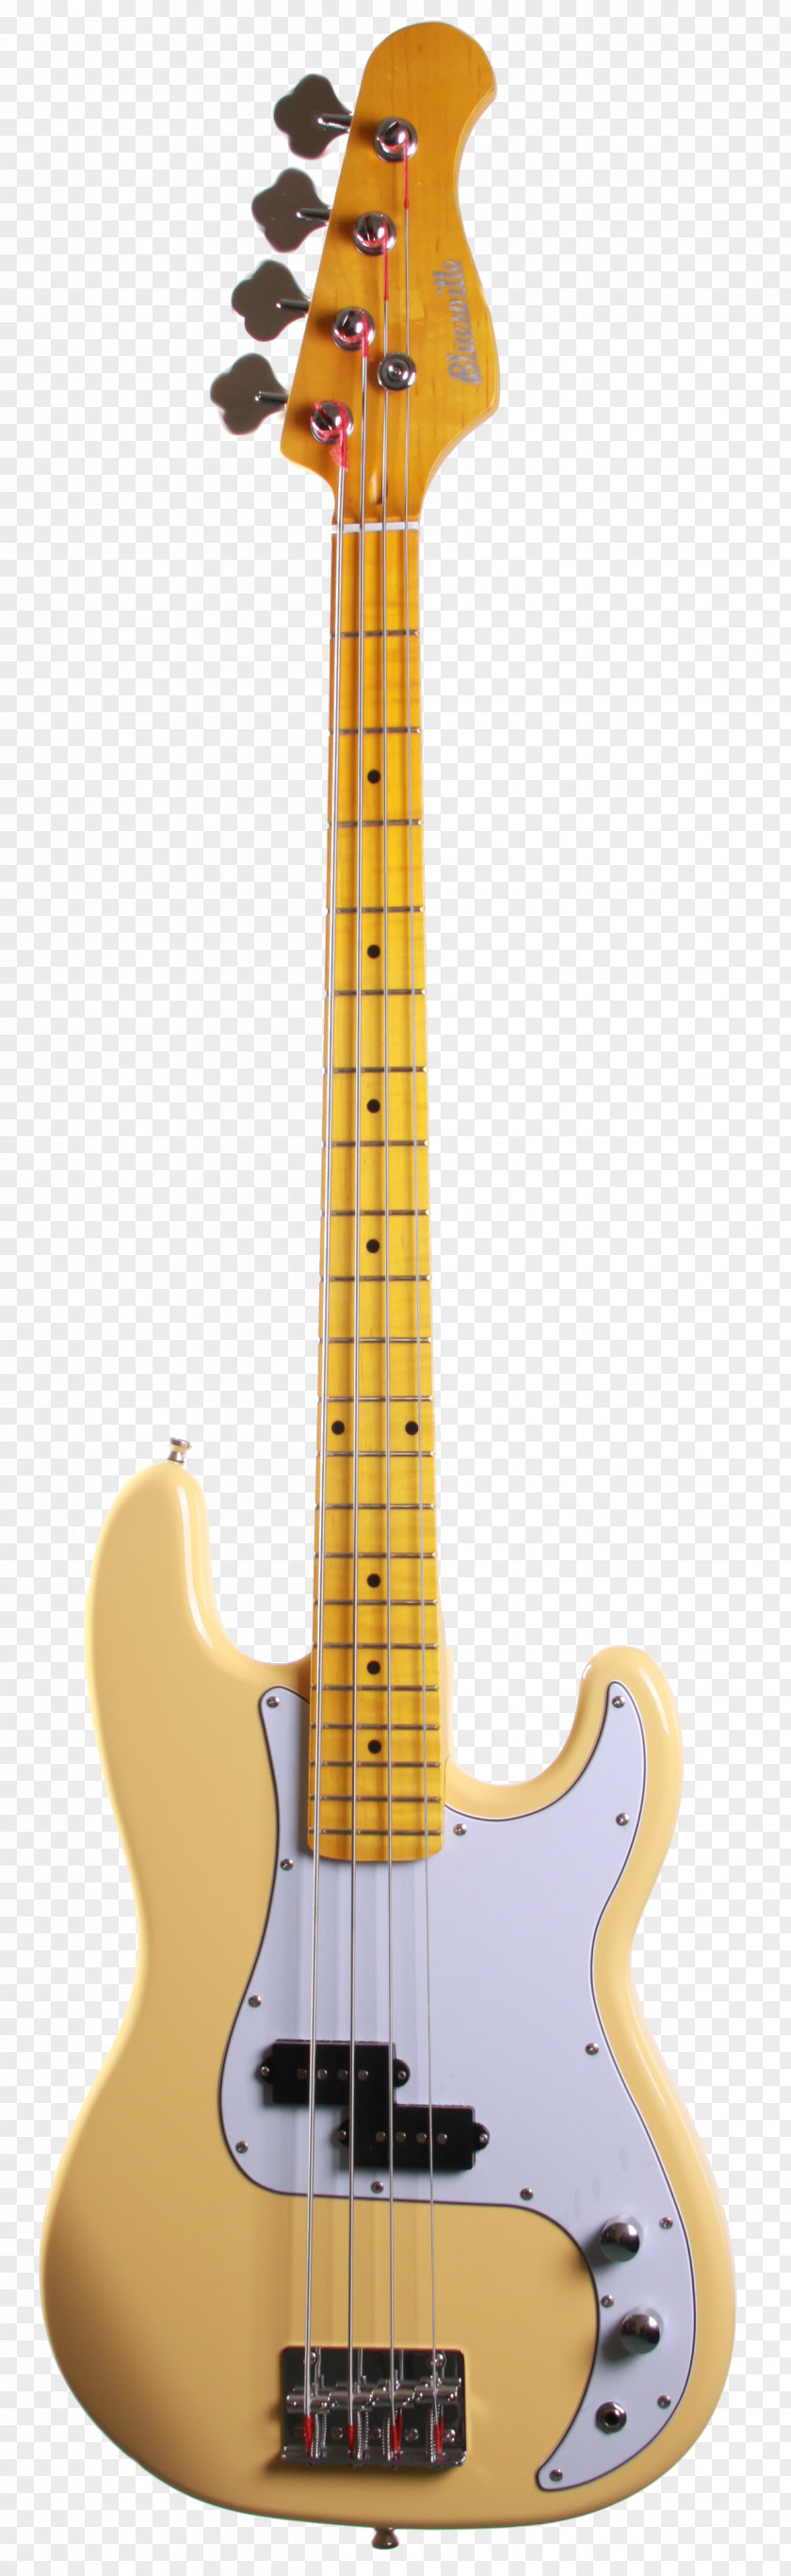 Bass Player Guitar Fender Stratocaster Musical Instruments Corporation Precision Jazz PNG